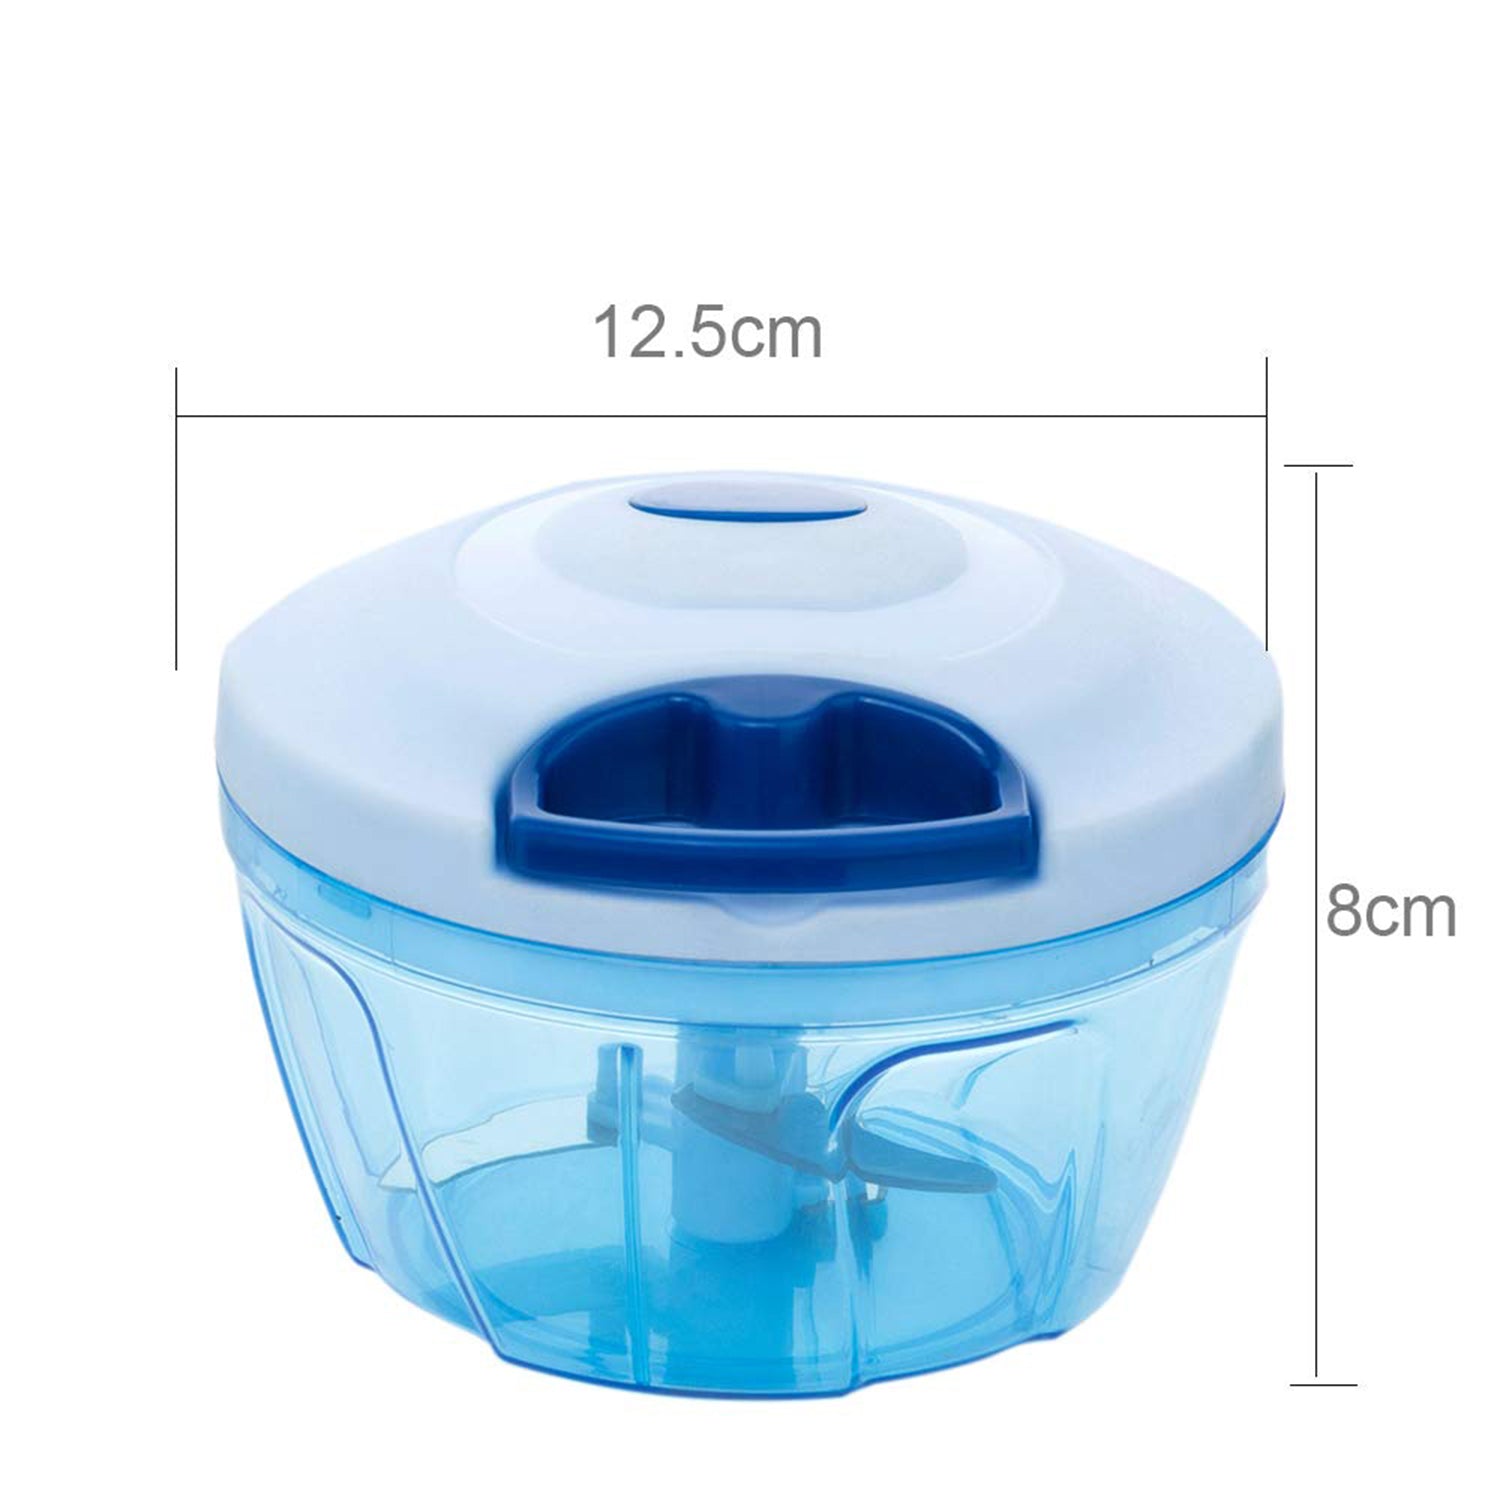 0080 V Atm Blue 450 ML Chopper widely used in all types of household kitchen purposes for chopping and cutting of various kinds of fruits and vegetables etc - DeoDap